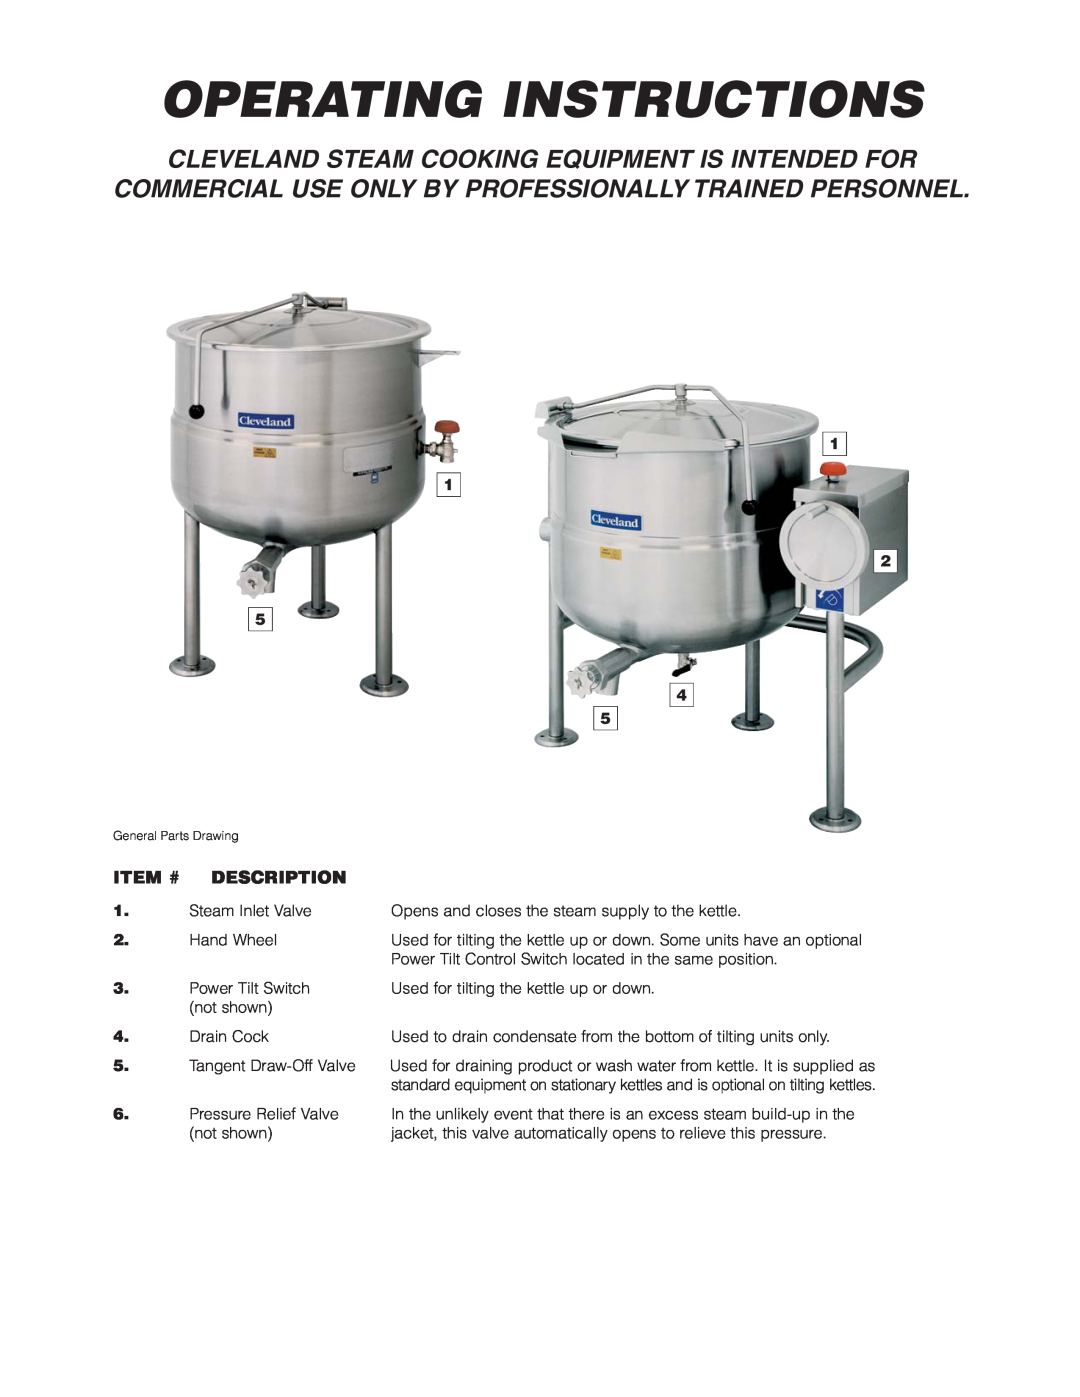 Cleveland Range KDL-TSH, KDL-SH, KDP-T manual Operating Instructions, Cleveland Steam Cooking Equipment Is Intended For 